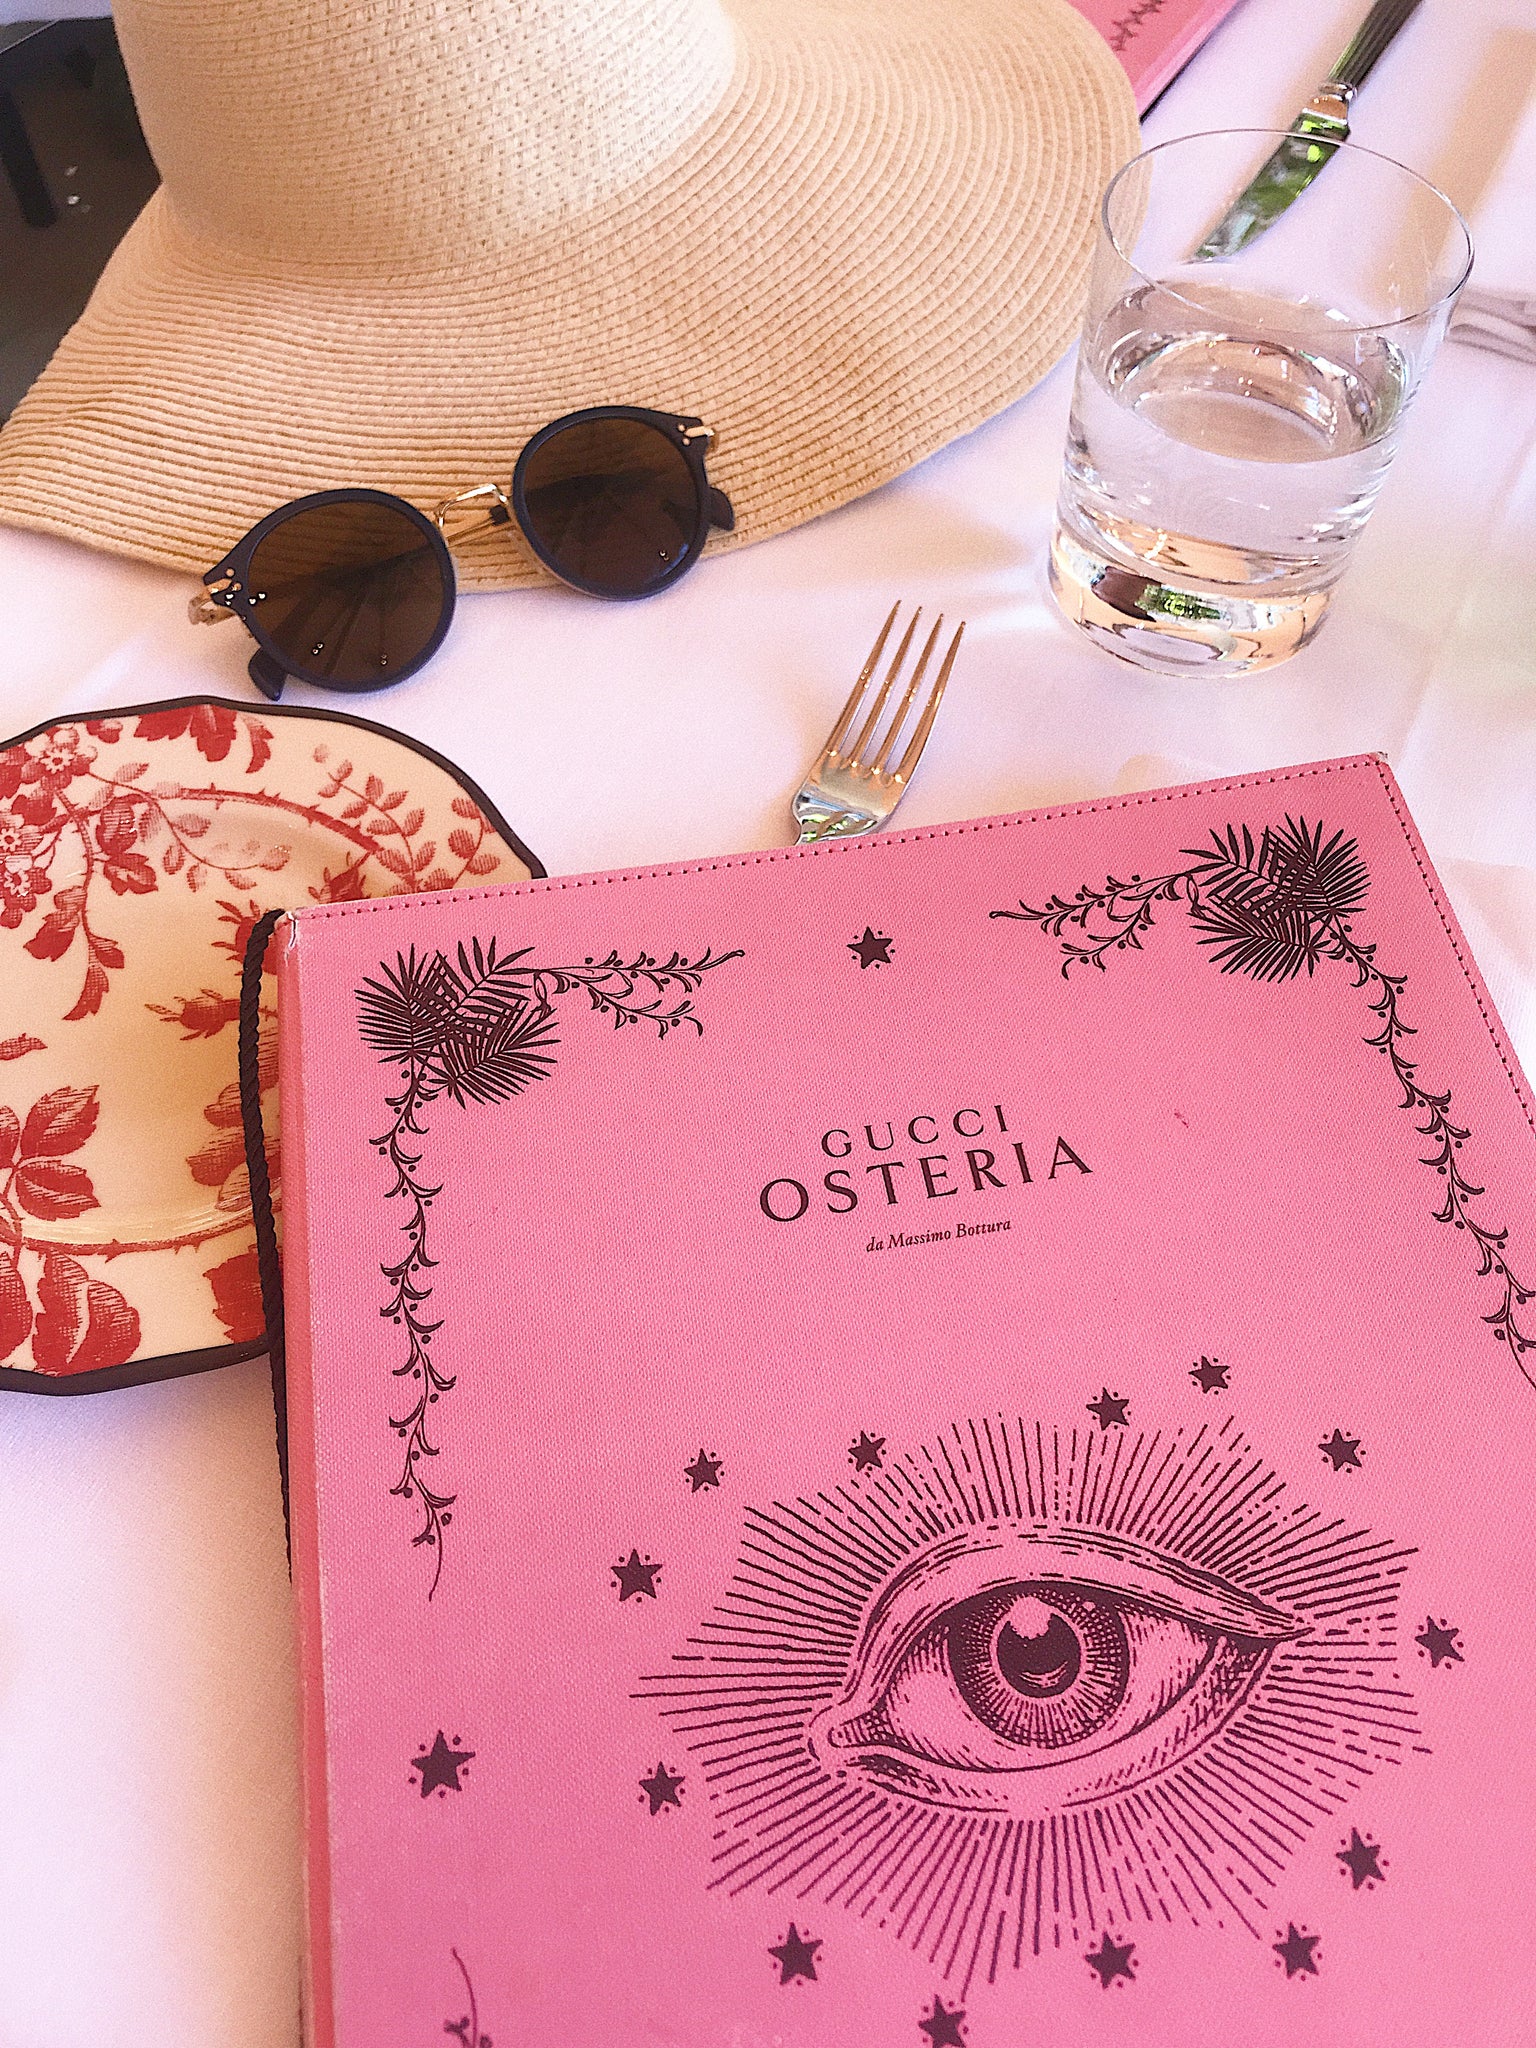 Gucci Museum, Osteria, Lunch spot Florence, Italy